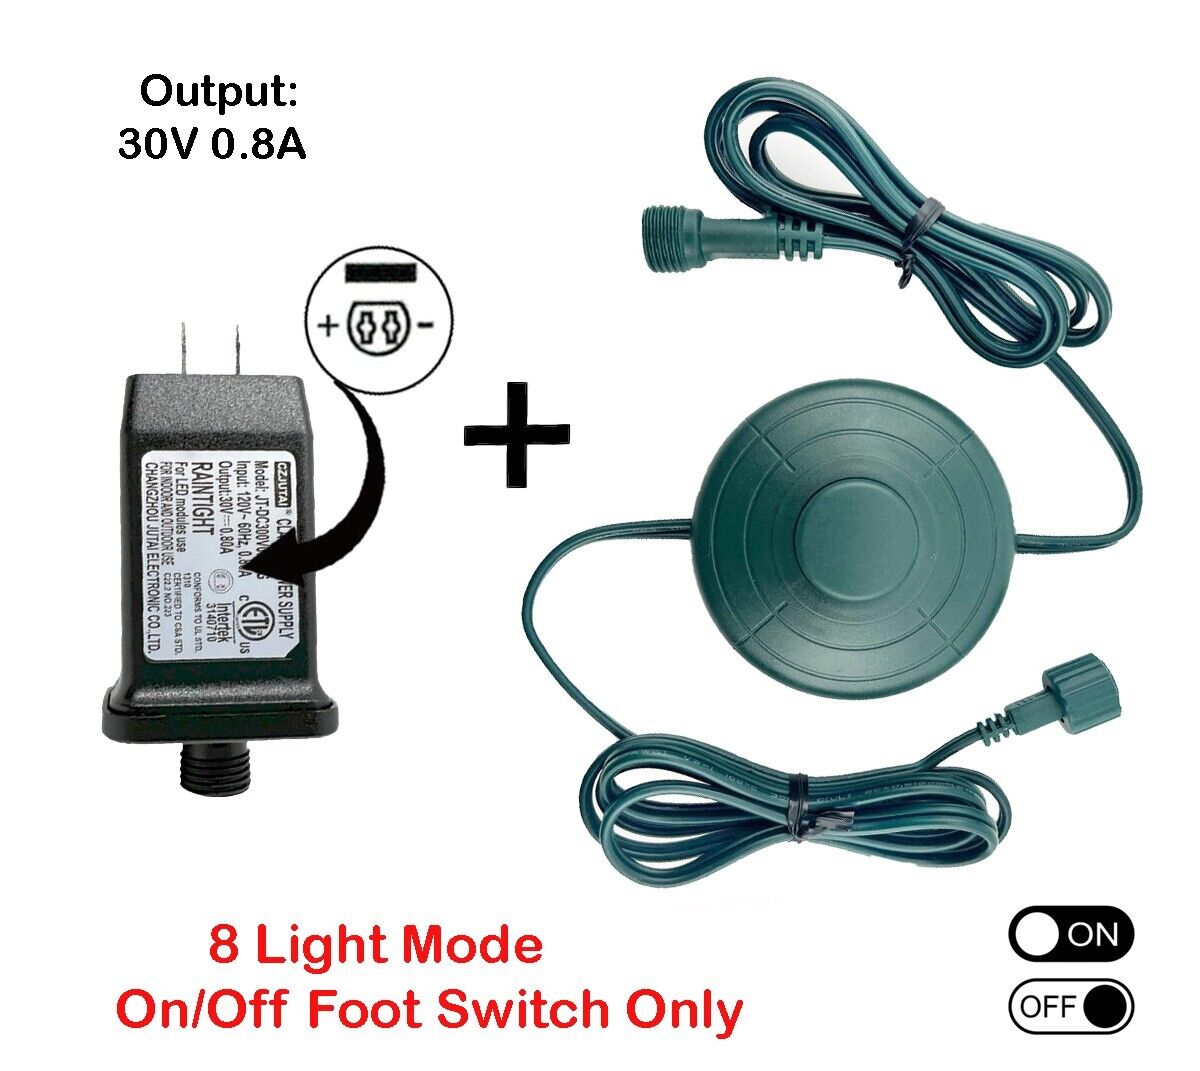 Set Adapter DC 30V 0.8A + Power Cord Foot Switch 5/8in Plug 6Ft - 8 LIGHT MODE